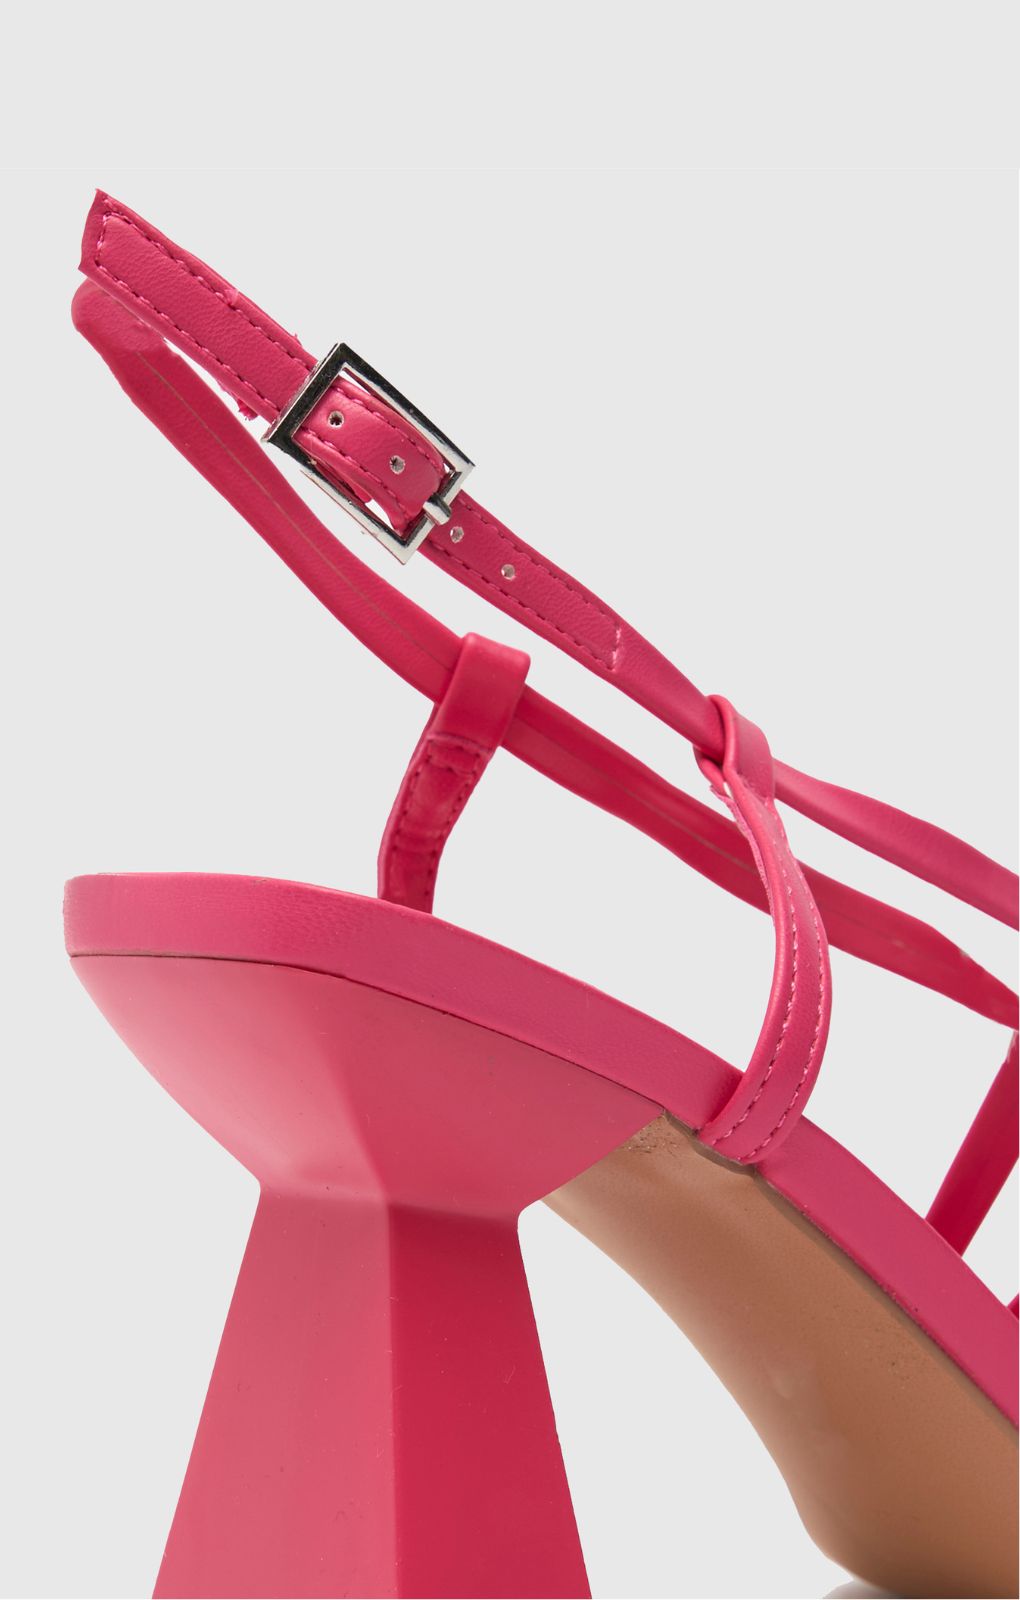 Schuh Scarlett Flared Block High Heels in Pink product image